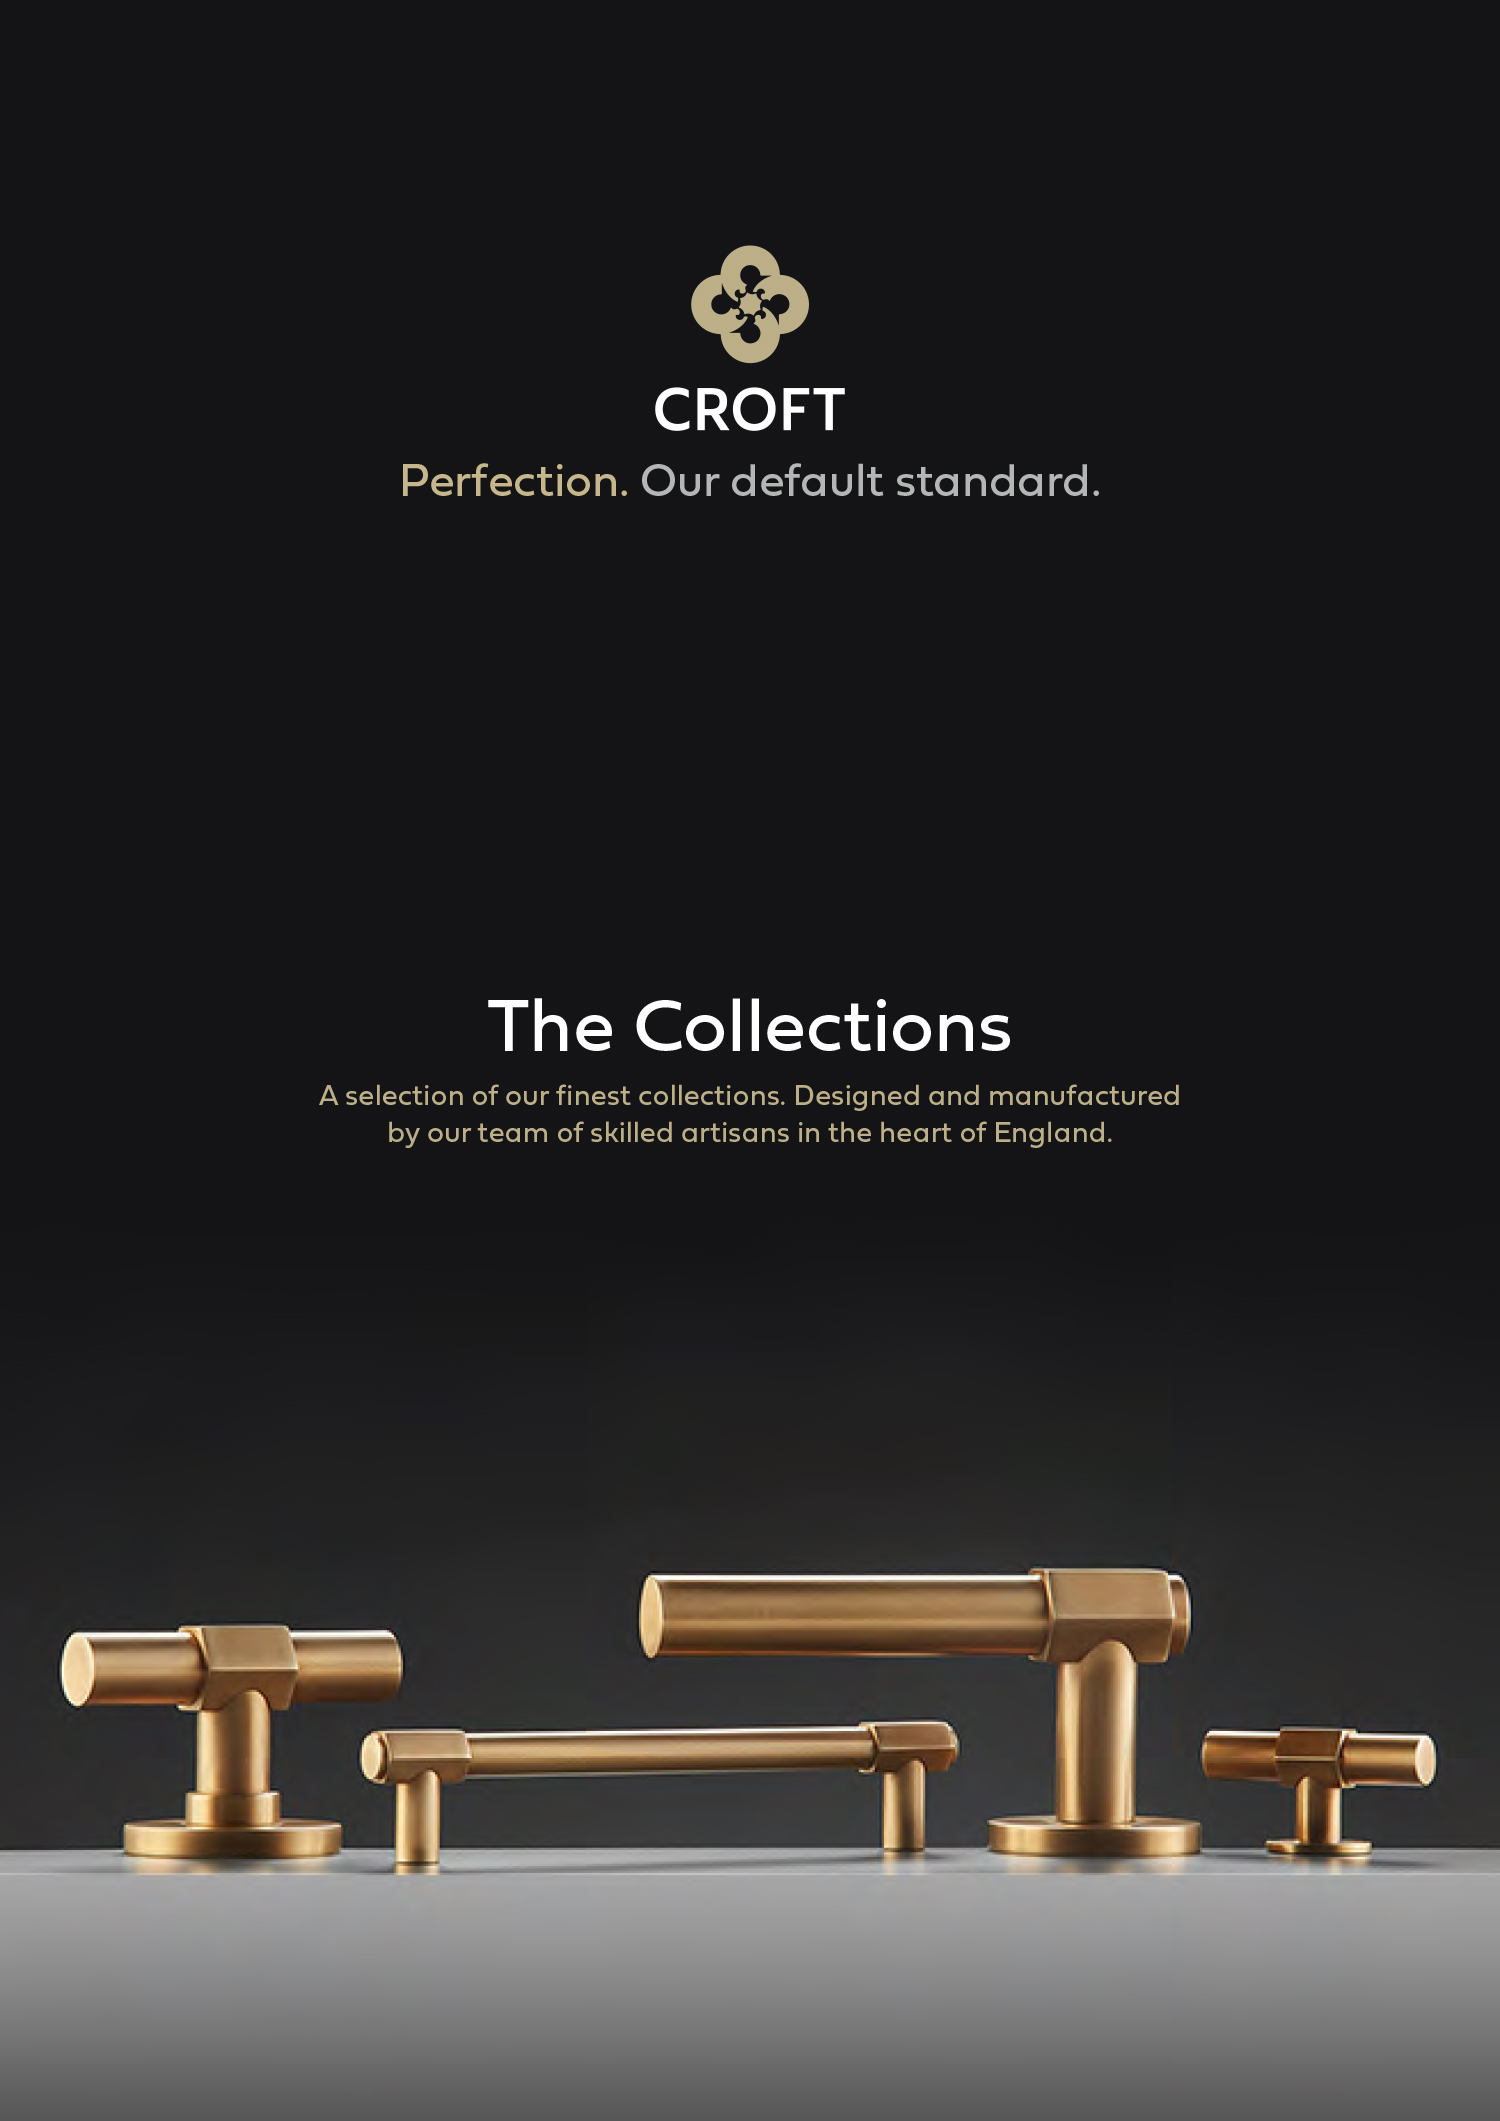 The collections brochure by Croft